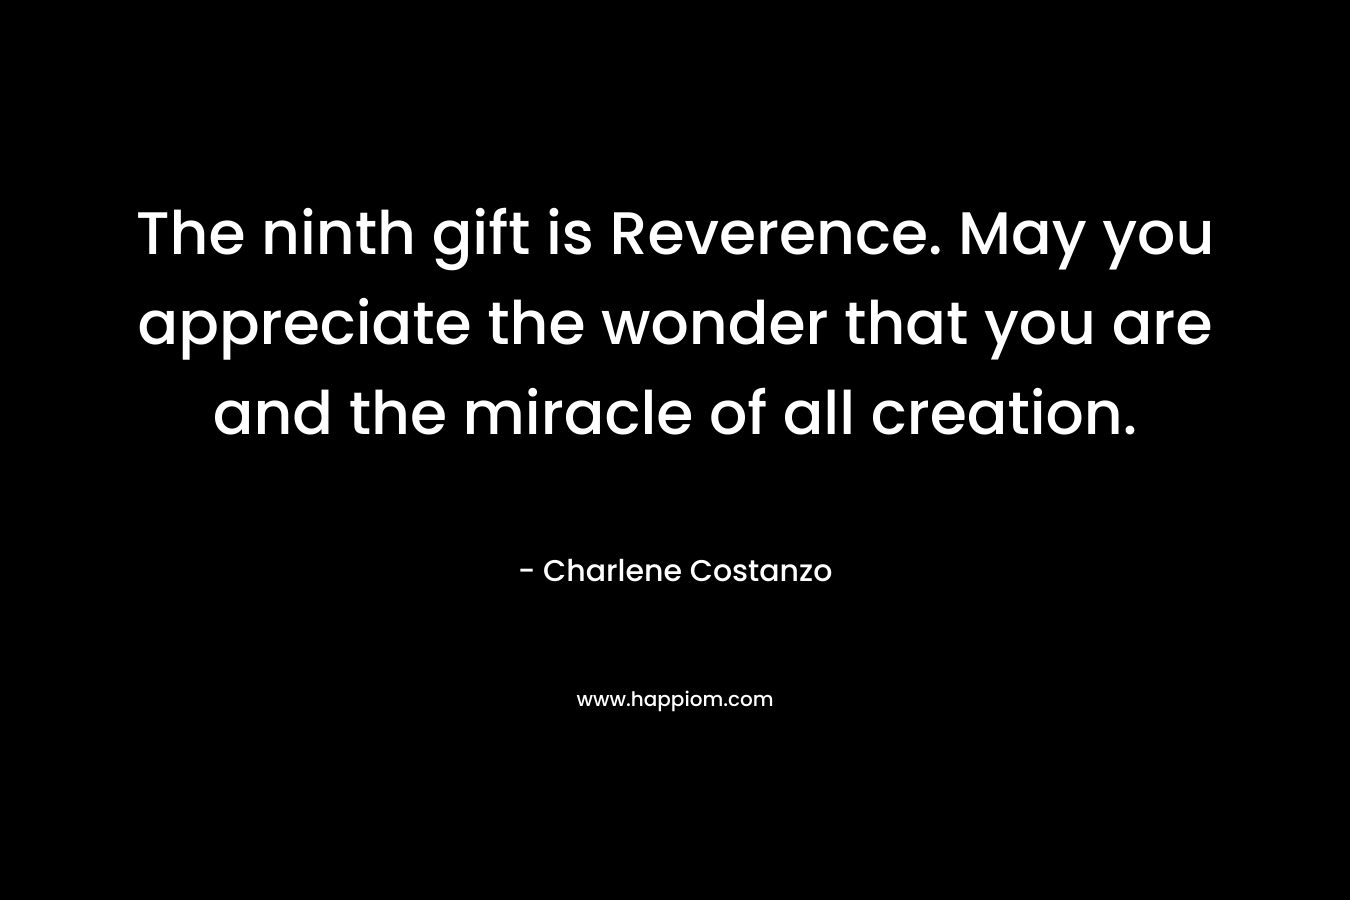 The ninth gift is Reverence. May you appreciate the wonder that you are and the miracle of all creation.